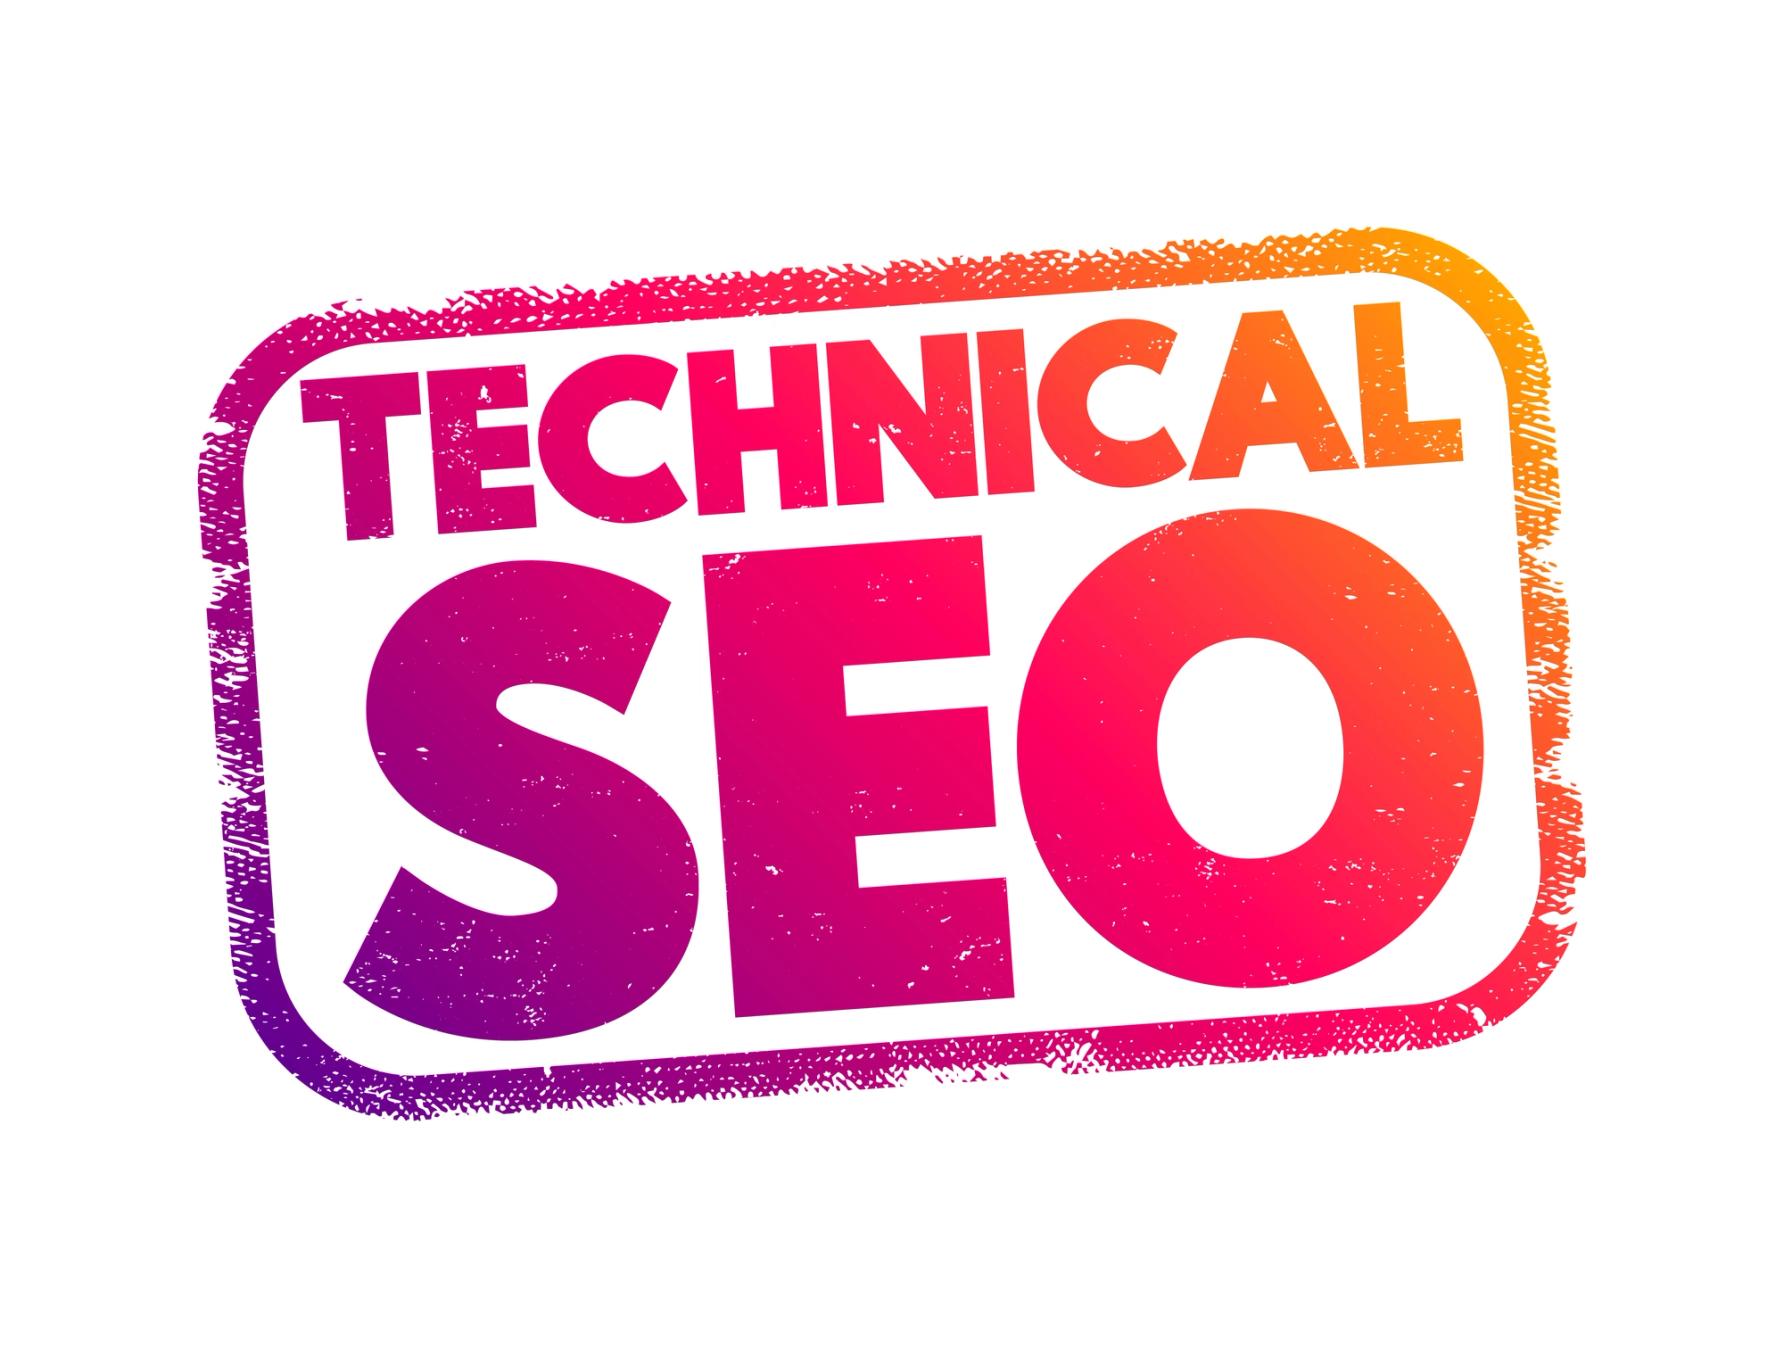 Technical search engine optimization